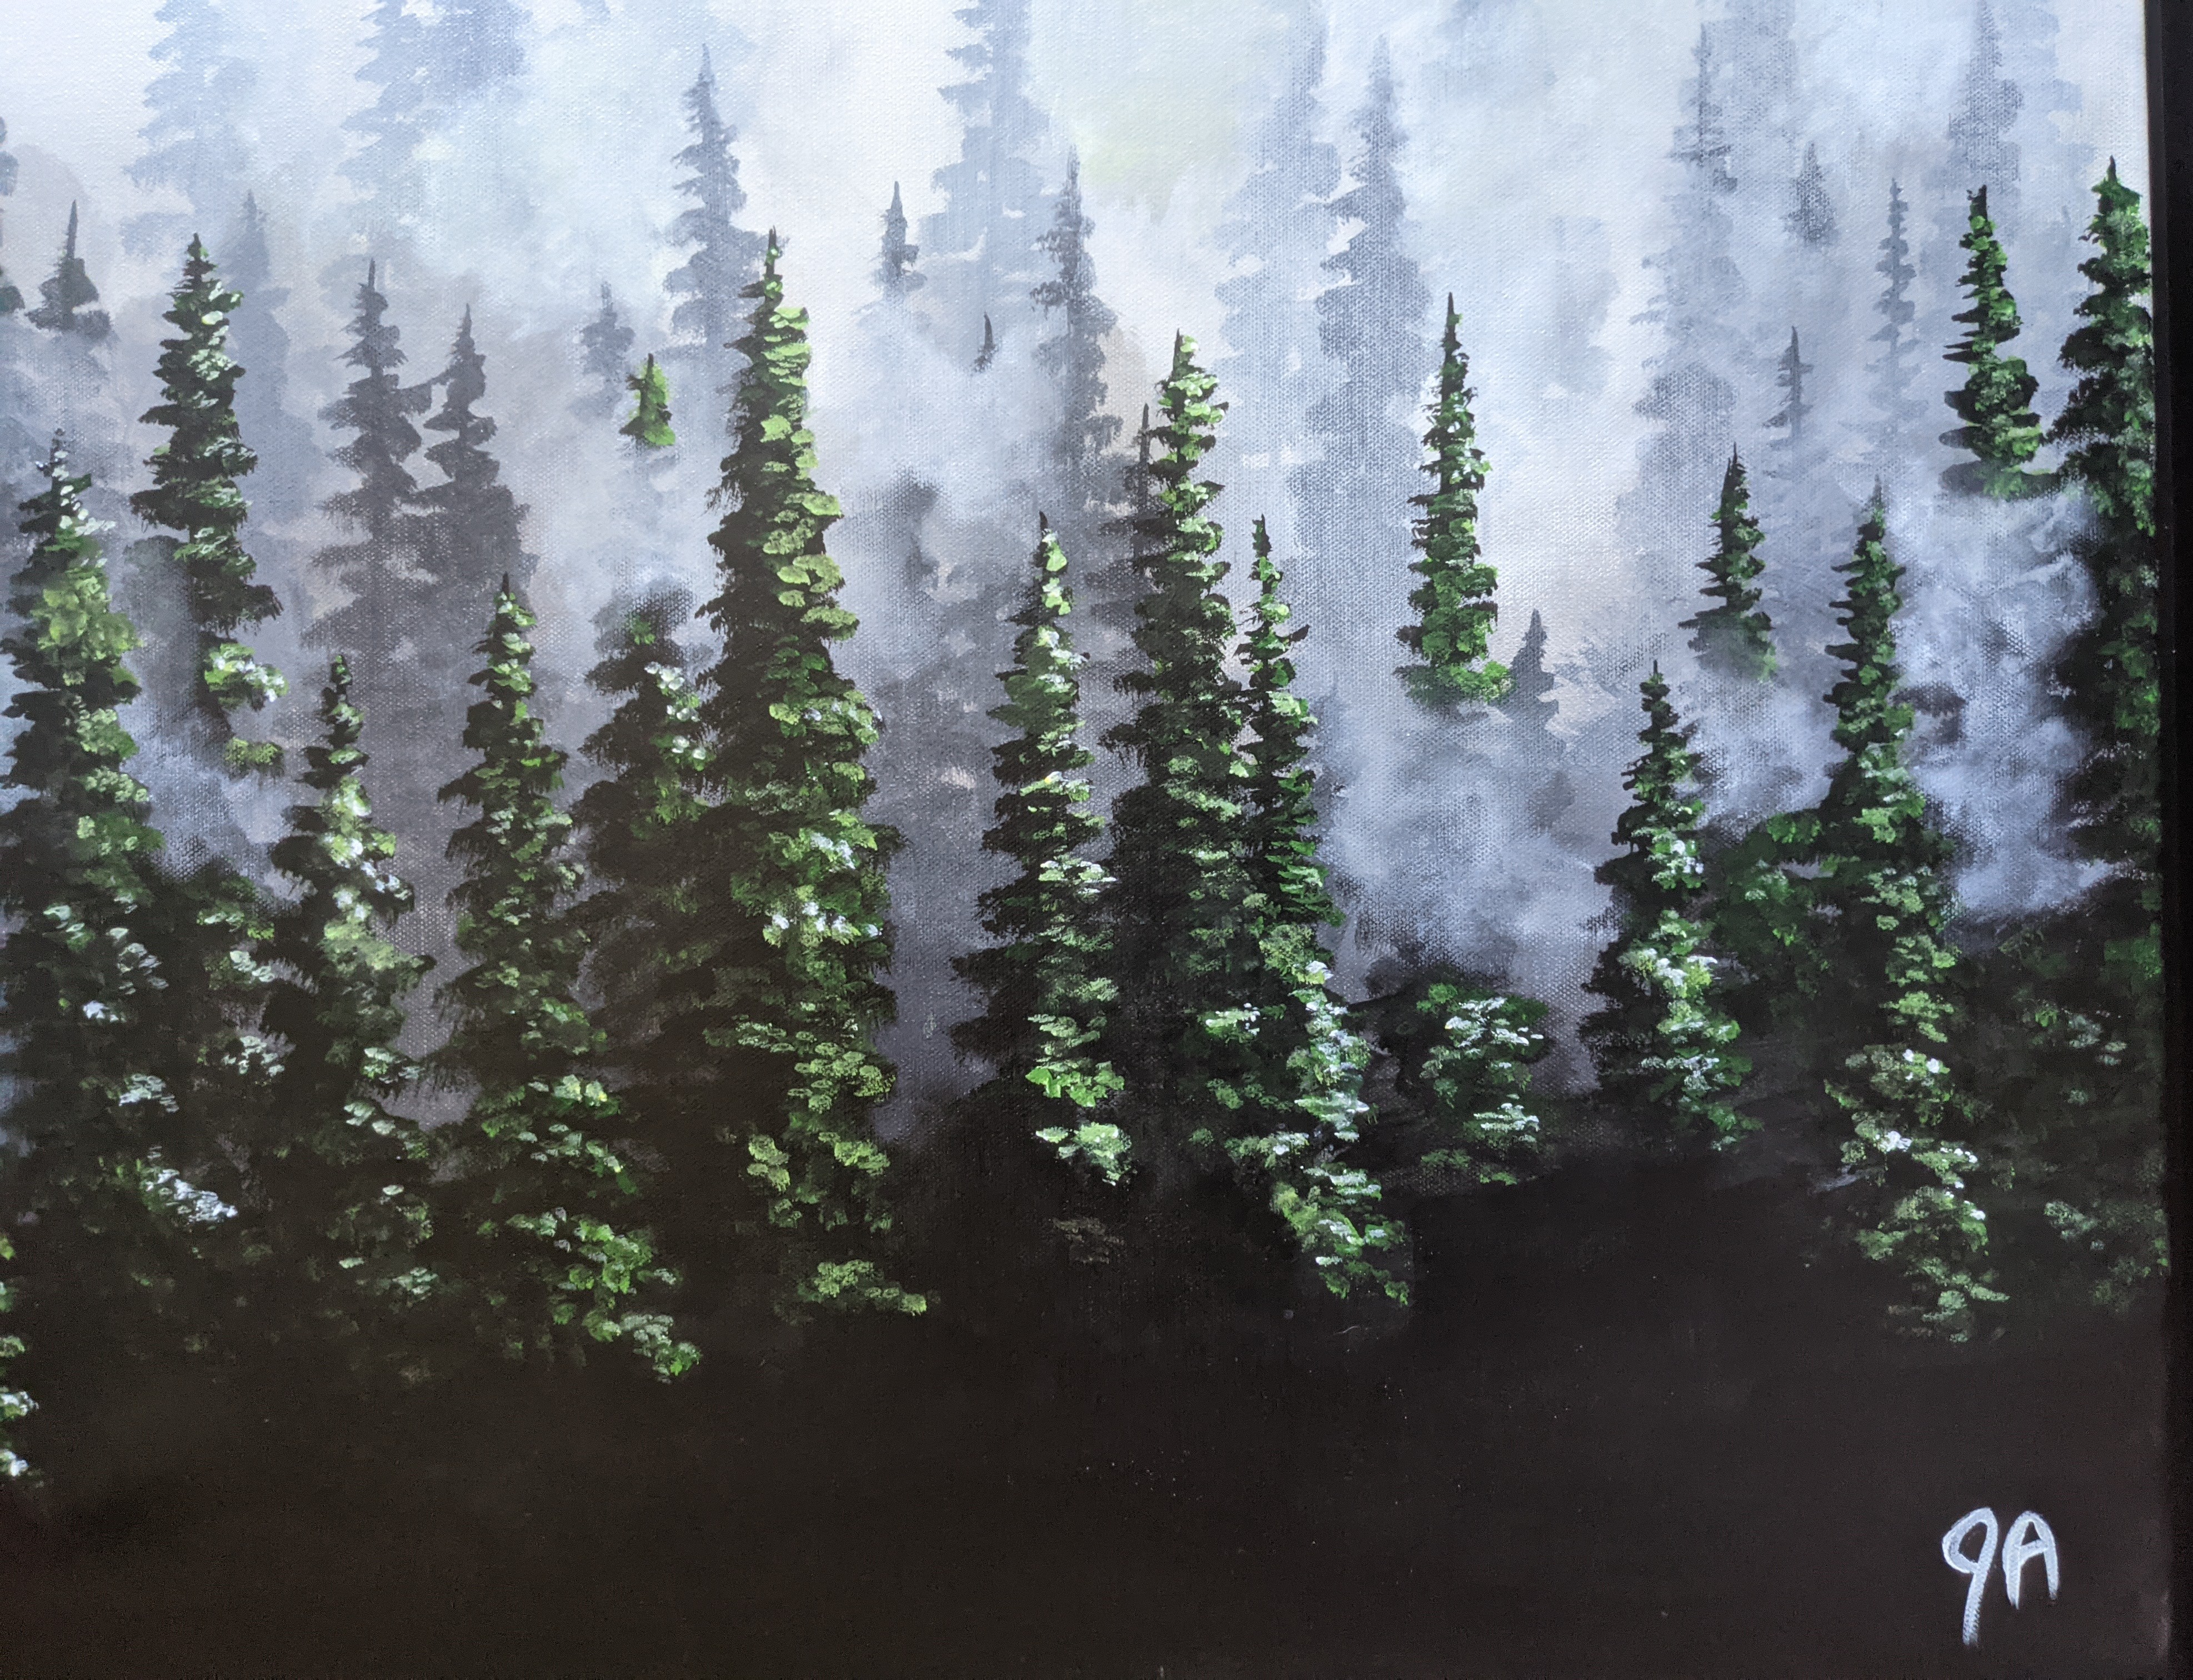 painting of conifer forest with mist in the treetops, which are highlighted on the tops and dark at the bottom